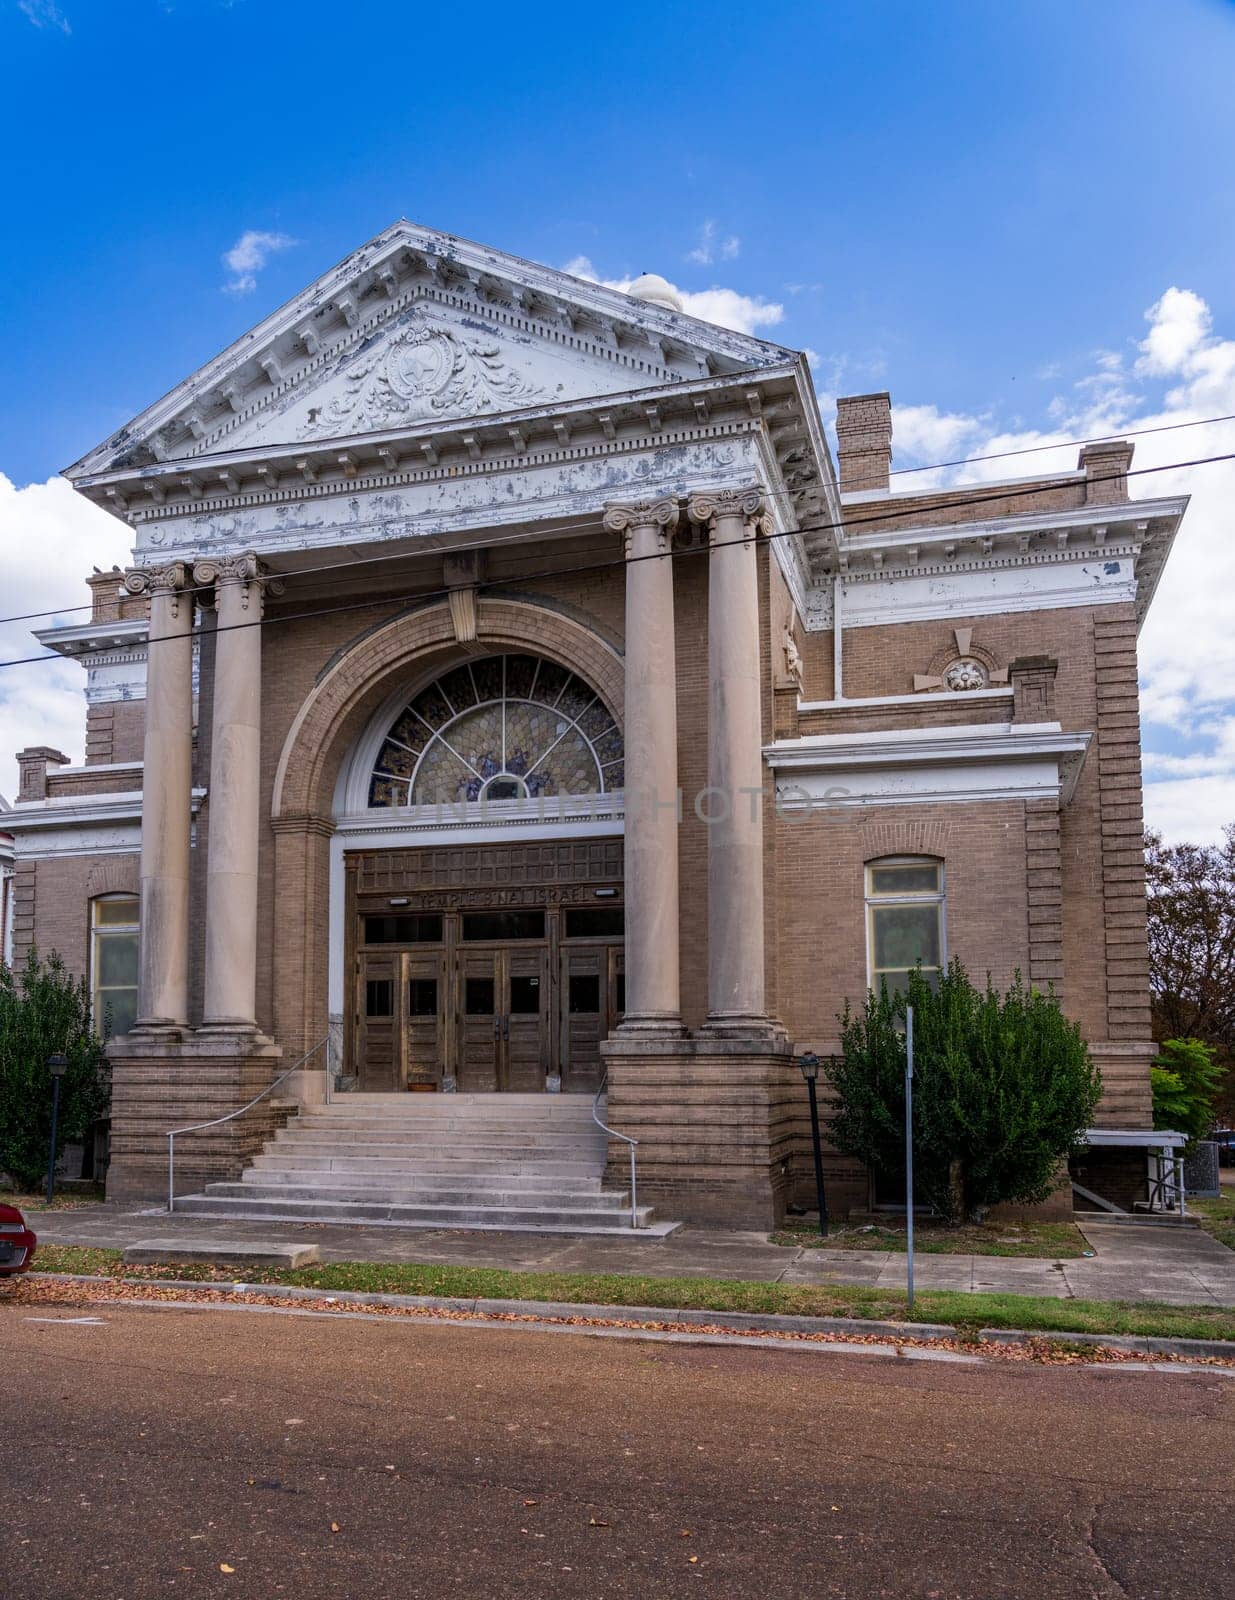 Exterior of Temple B Nai Israel synagogue in Mississippi city of Natchez